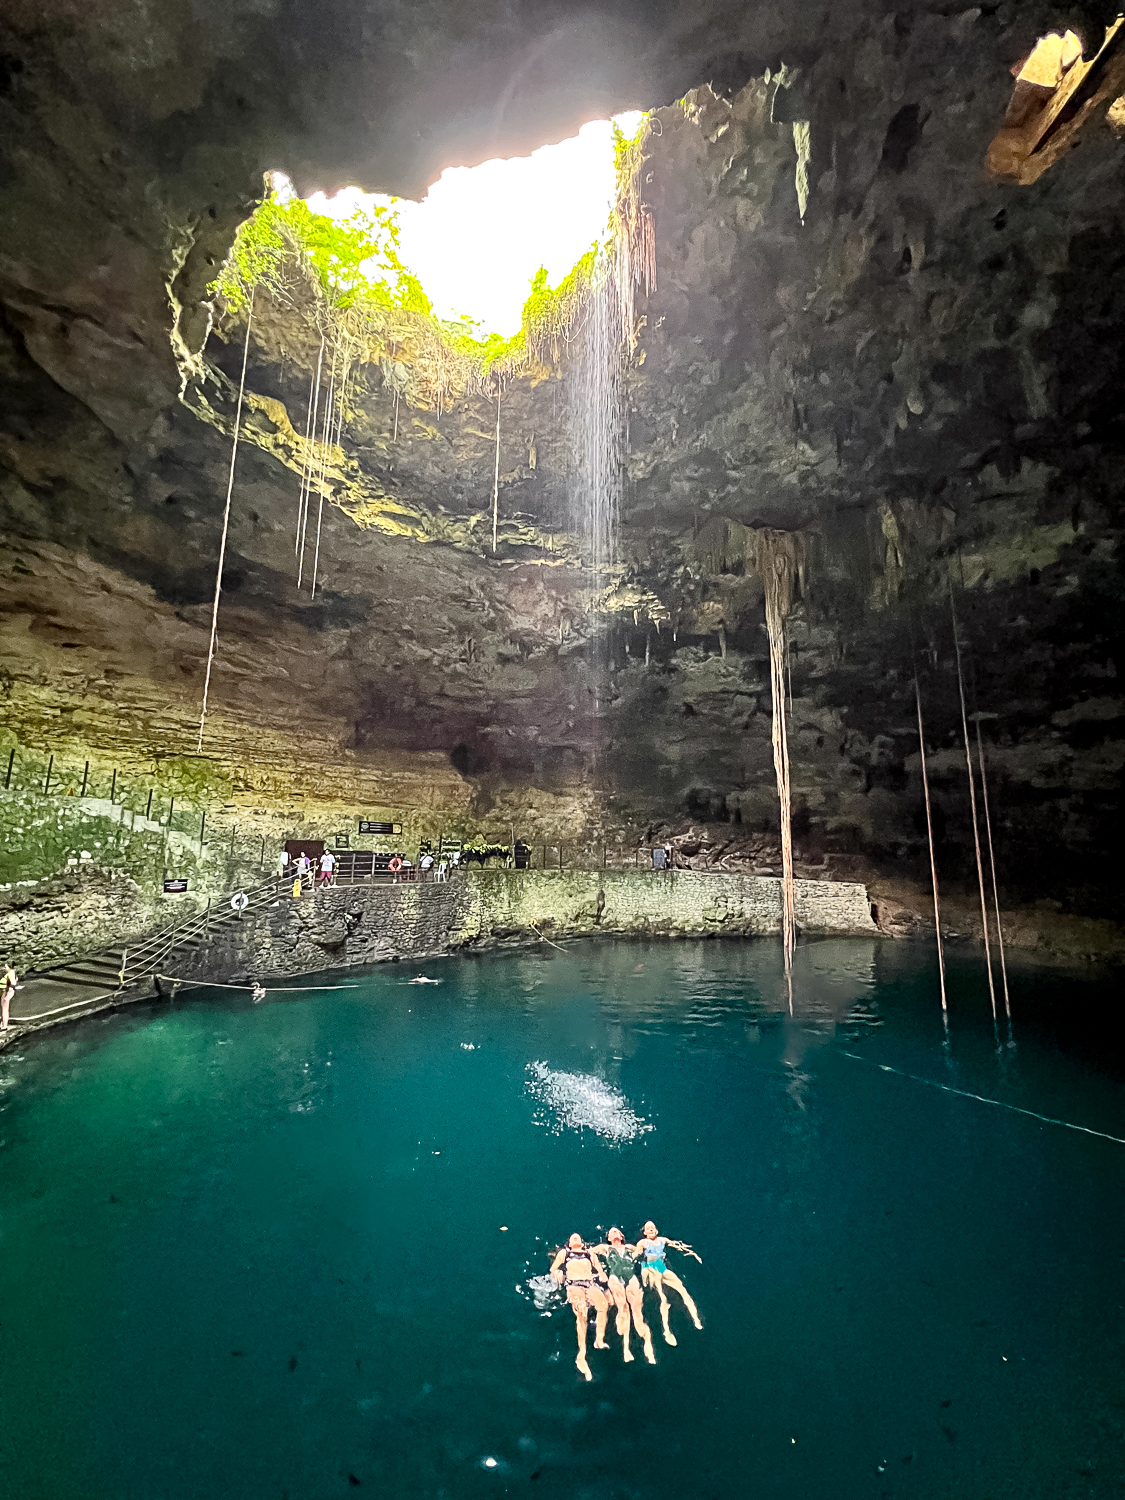 Pacific Globetrotters, budget family travel blog, shares the Best Cenotes In Cancun. Hubiku